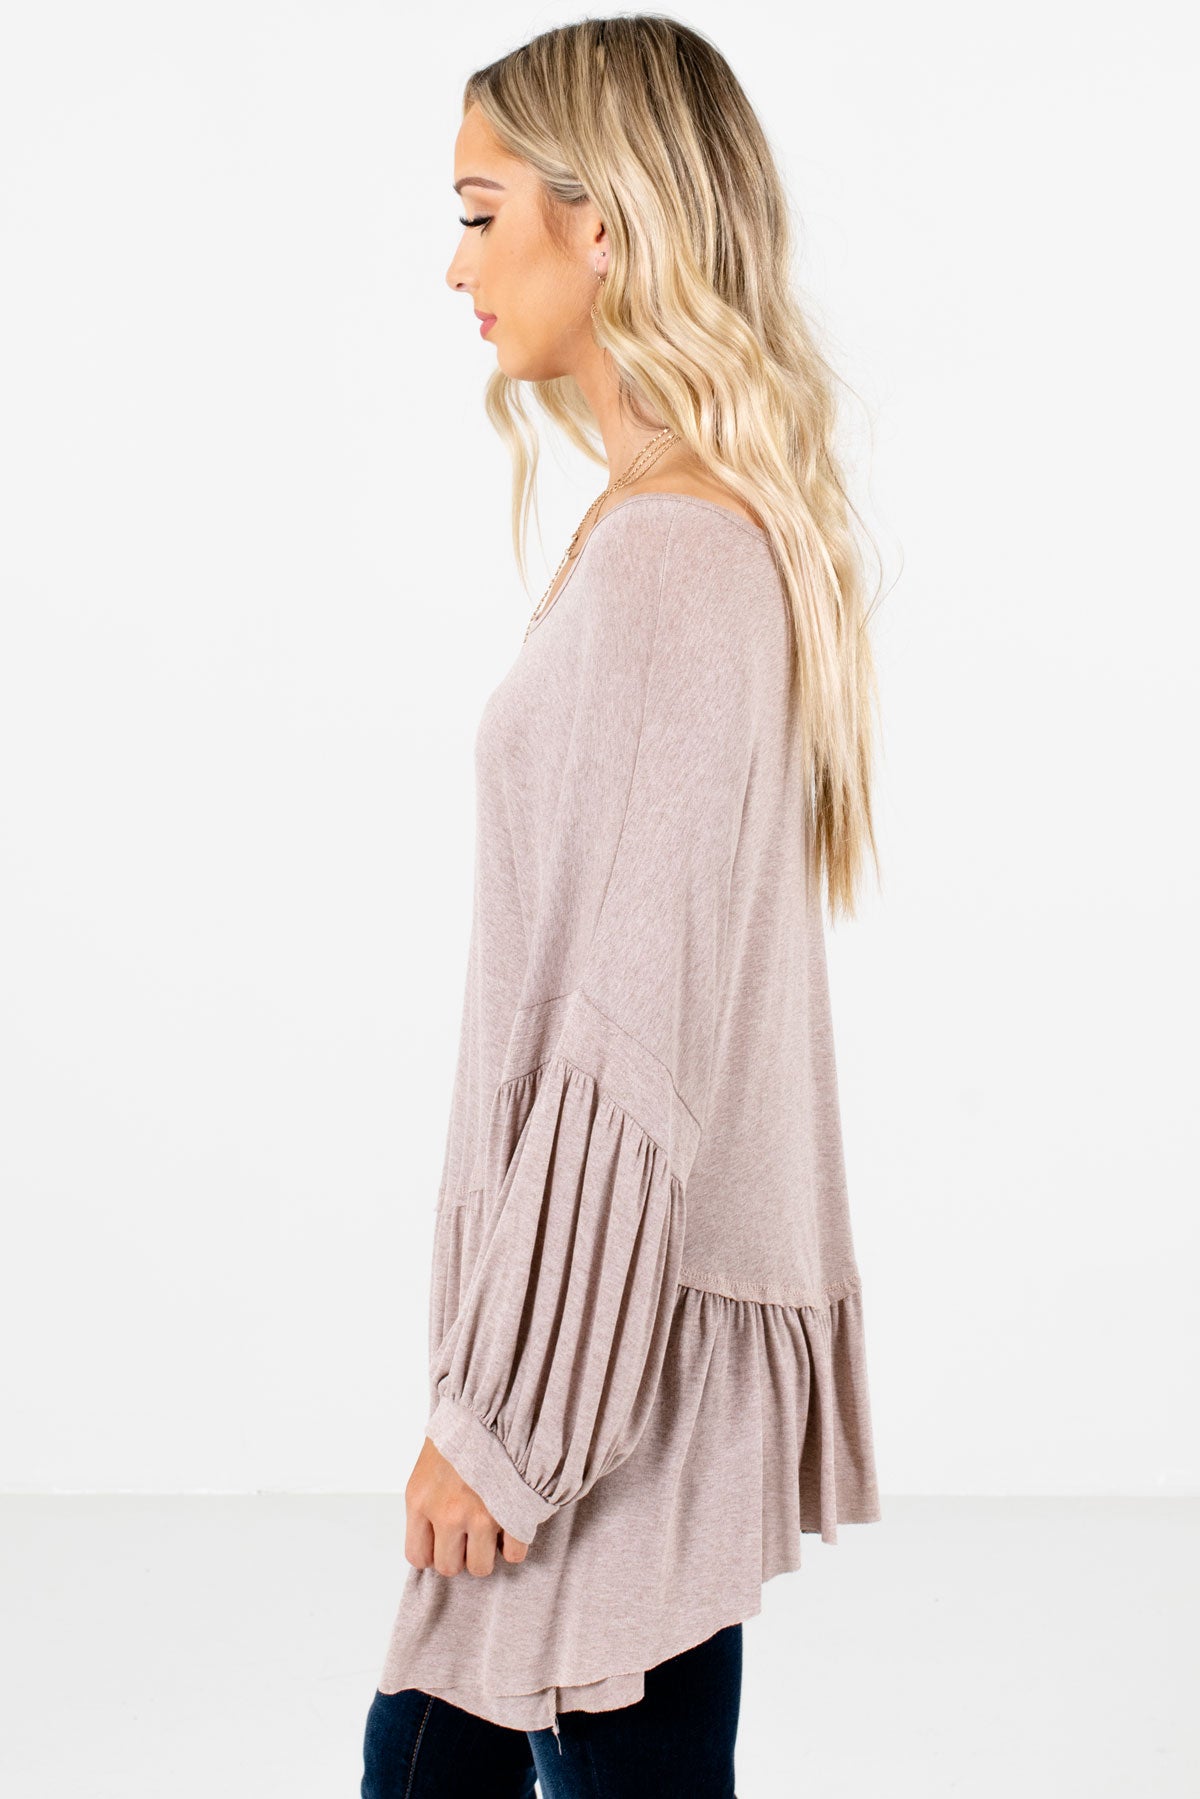 Taupe Brown Subtle Bubble Sleeve Boutique Tops for Women